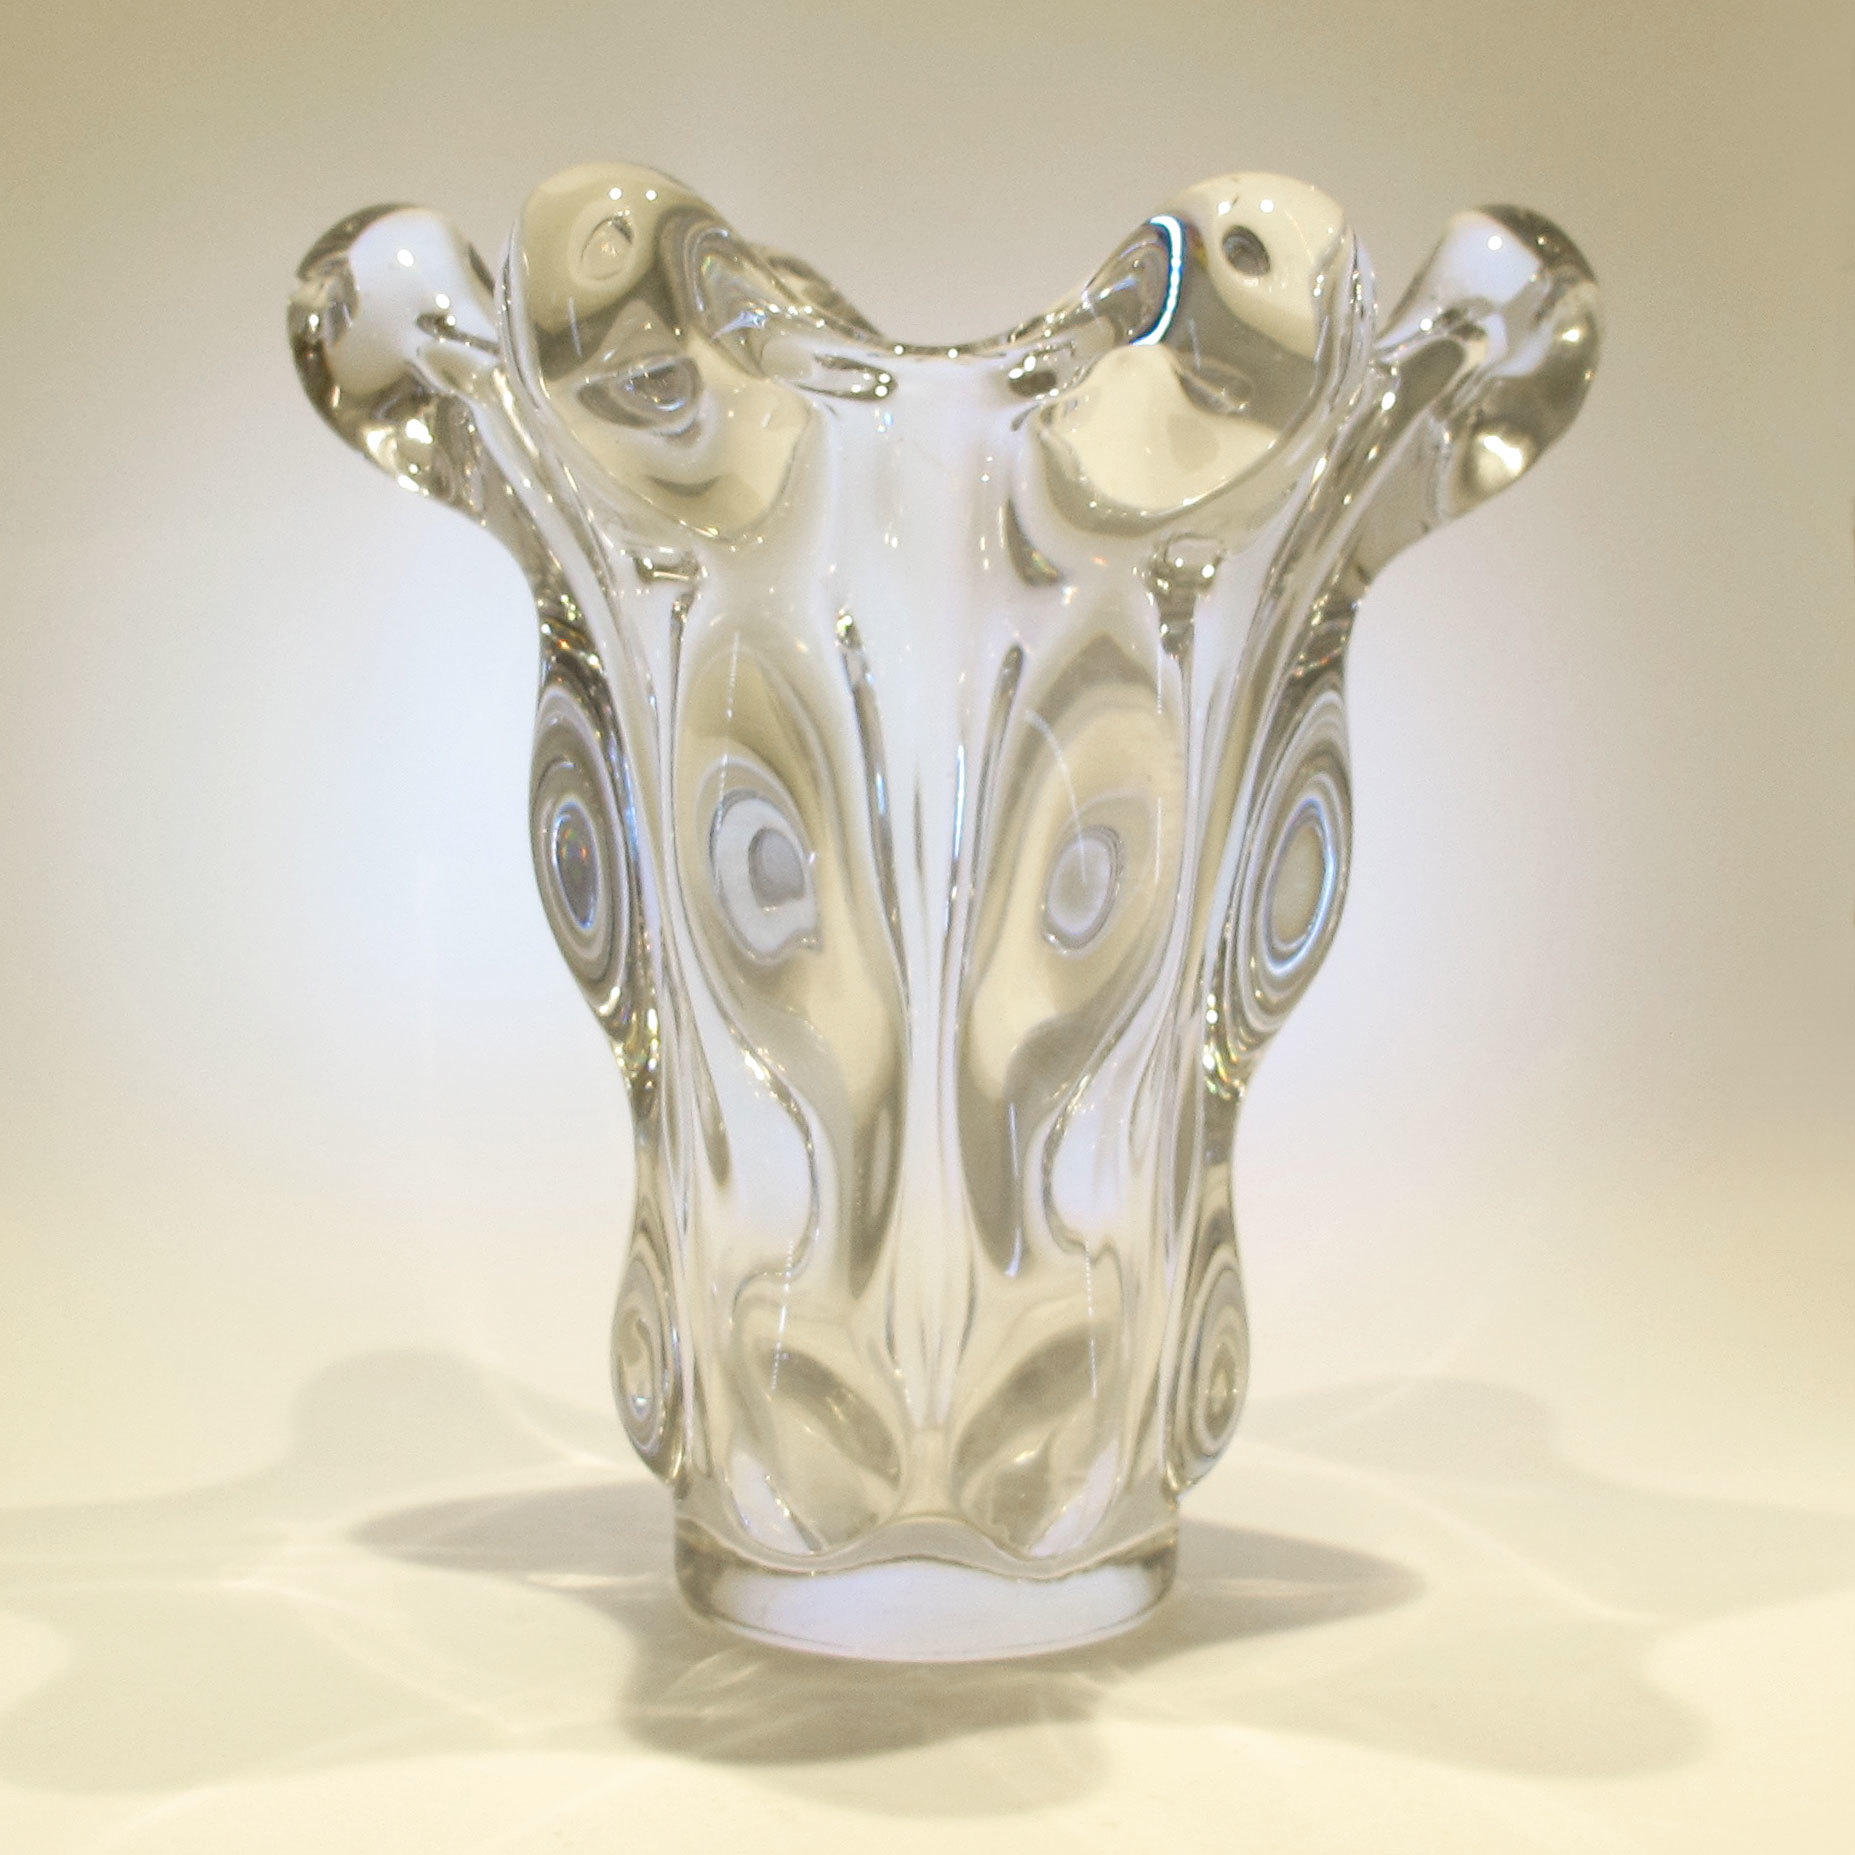 The image for Vannes Vases 01